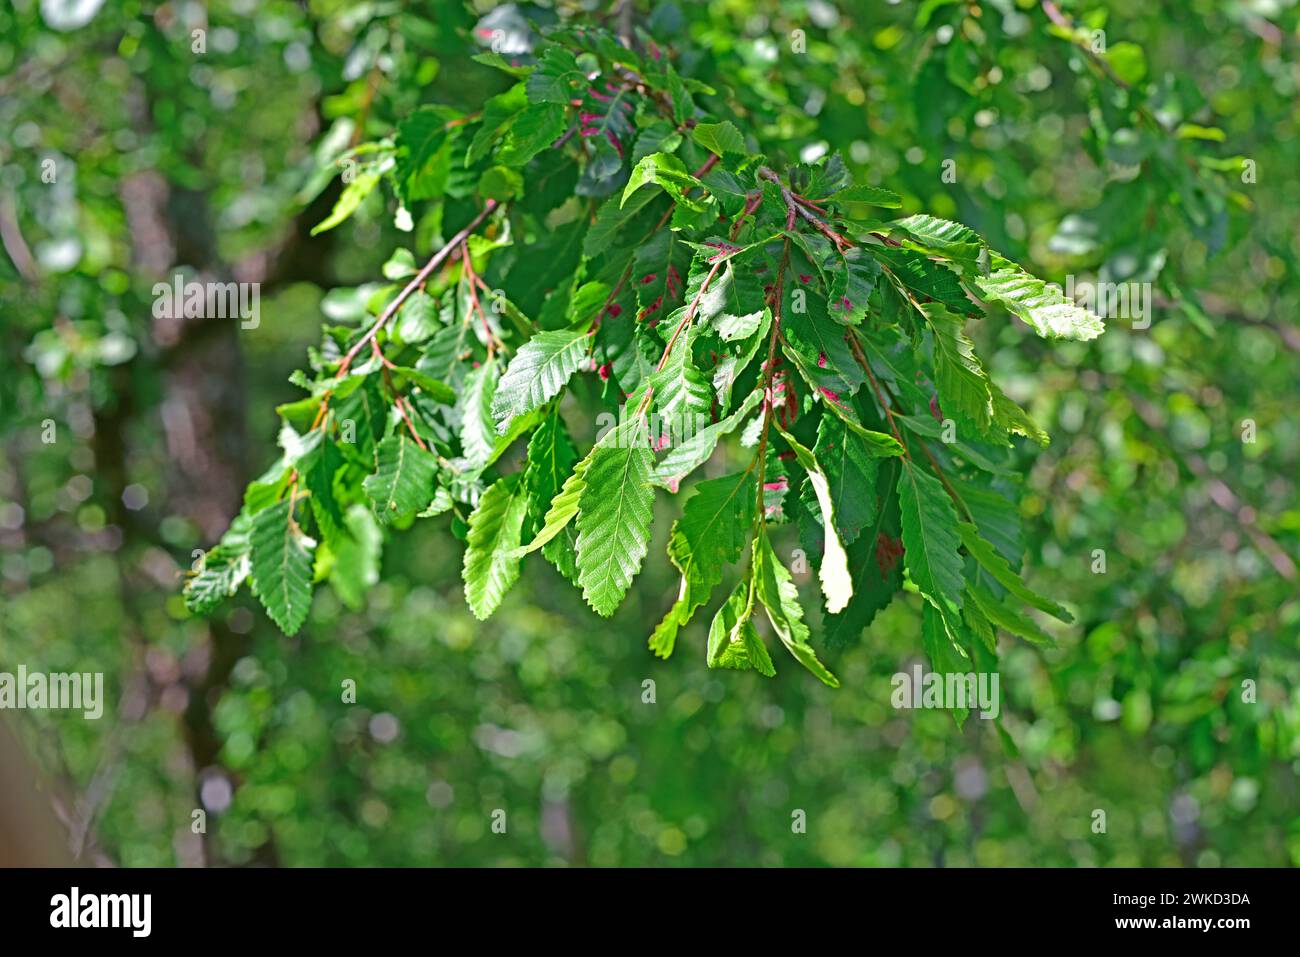 Rauli or southern beech (Nothofagus alpina or Nothofagus procera) is a deciduous tree native to central and southern Chile and in some locations of Ar Stock Photo